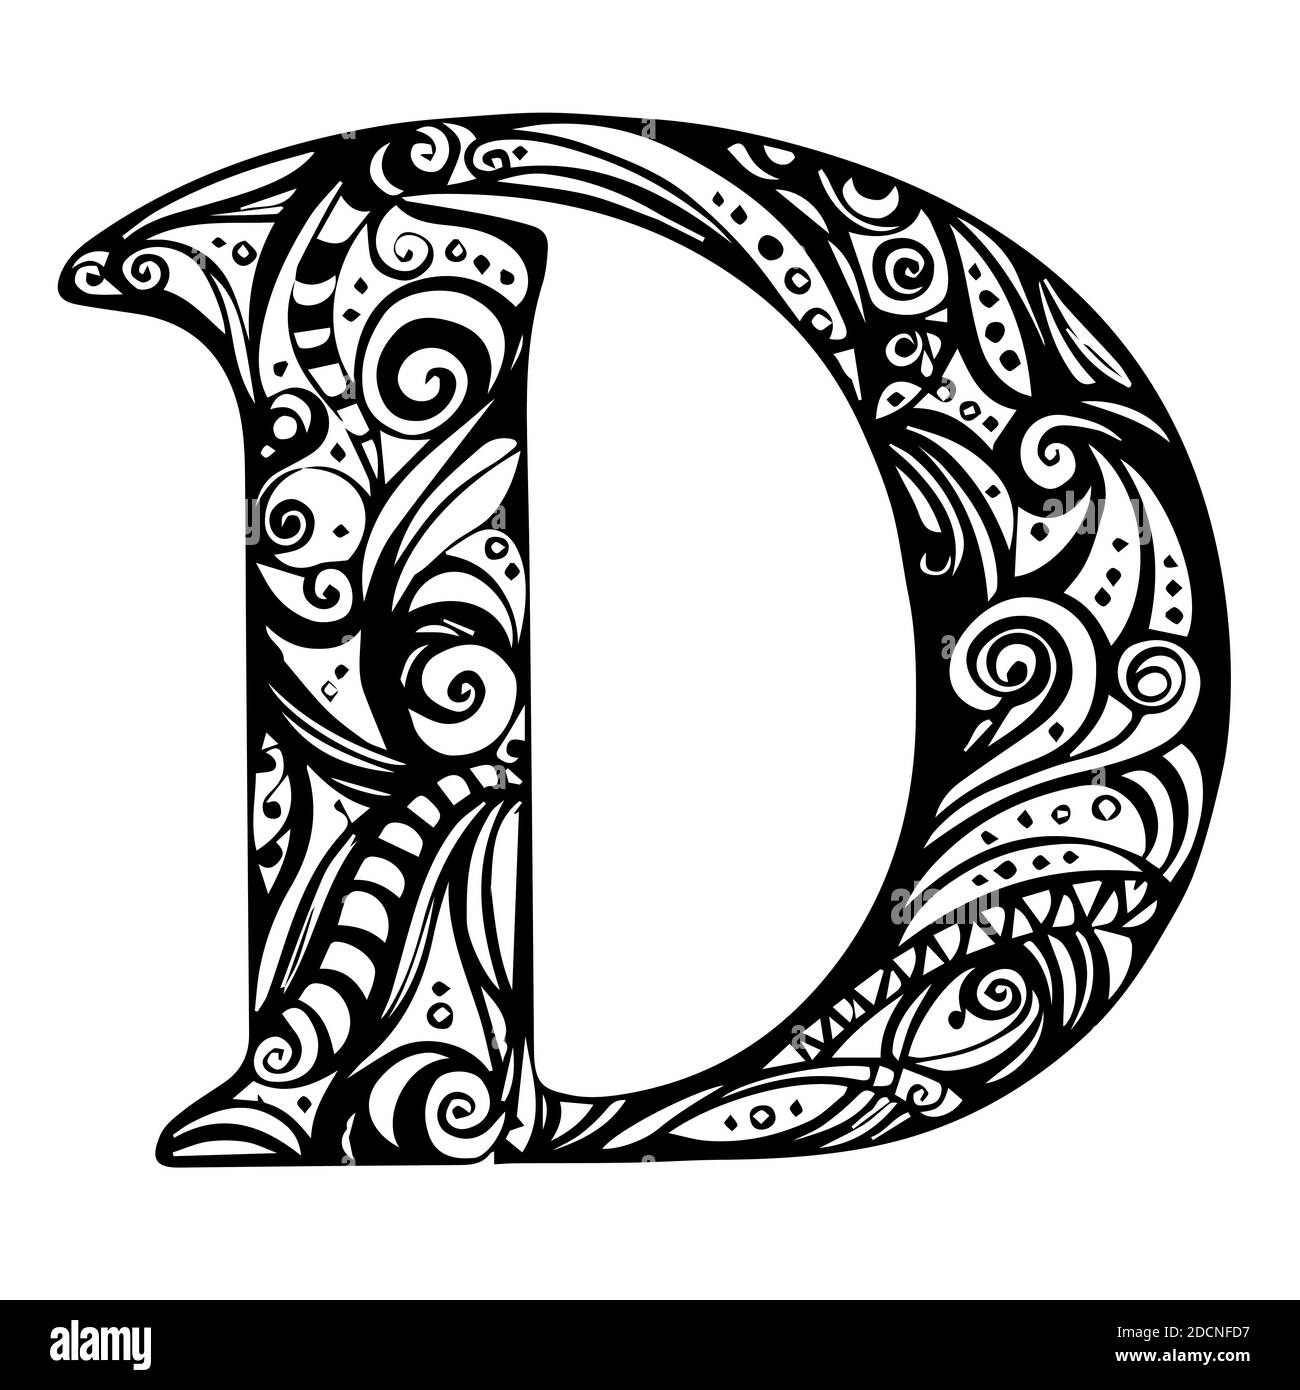 Letter d Black and White Stock Photos & Images - Alamy